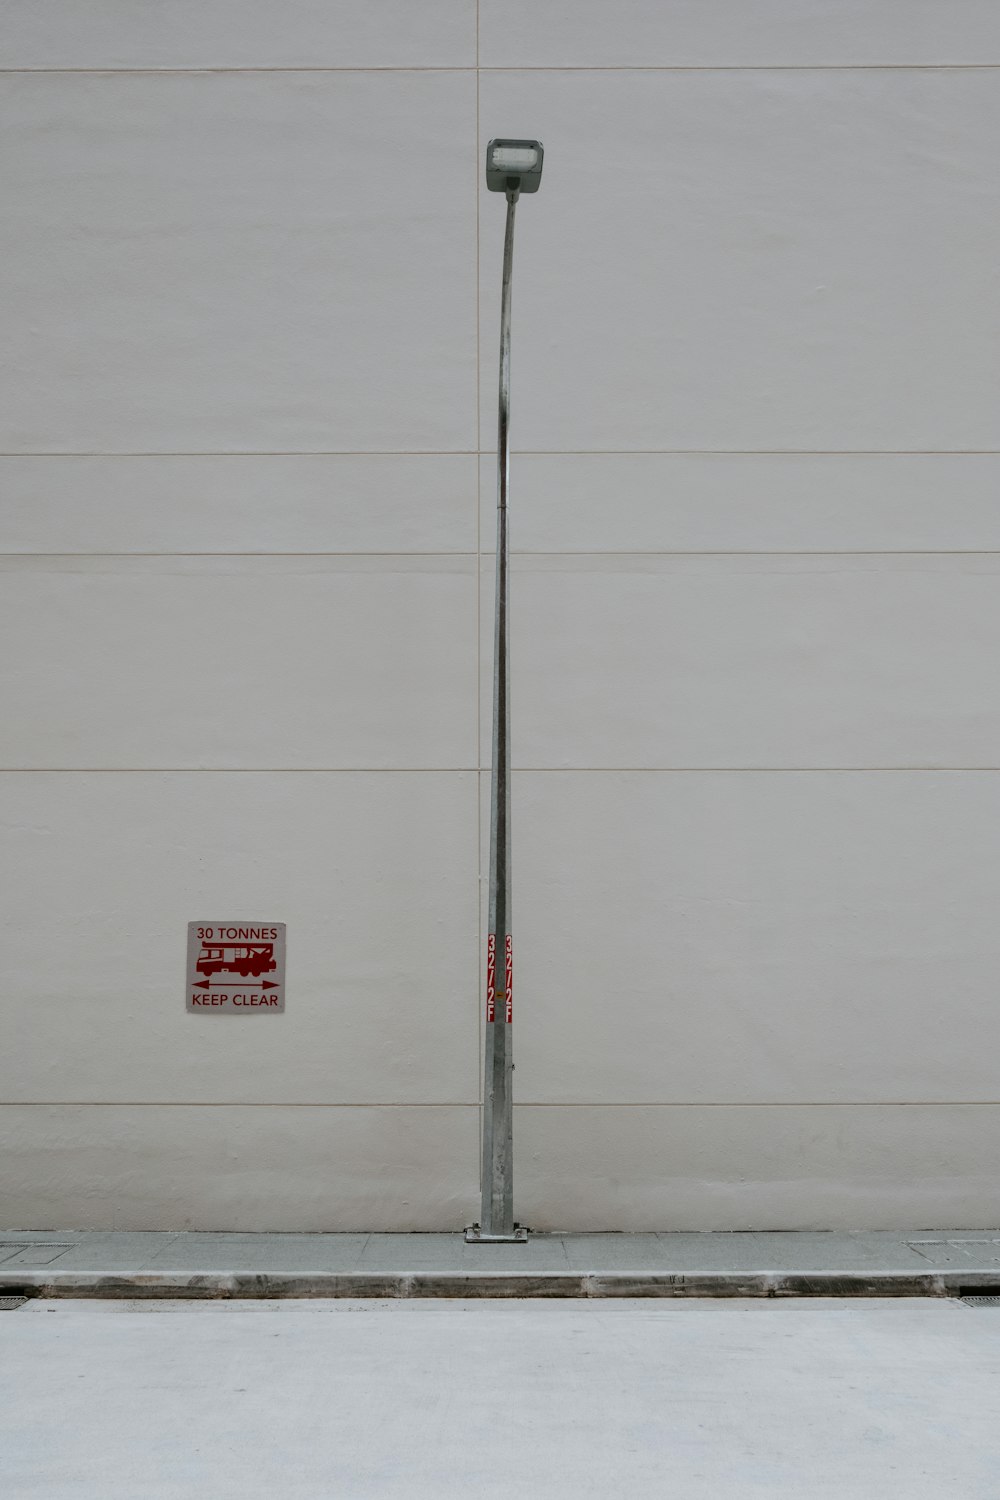 a pole with a street light attached to it